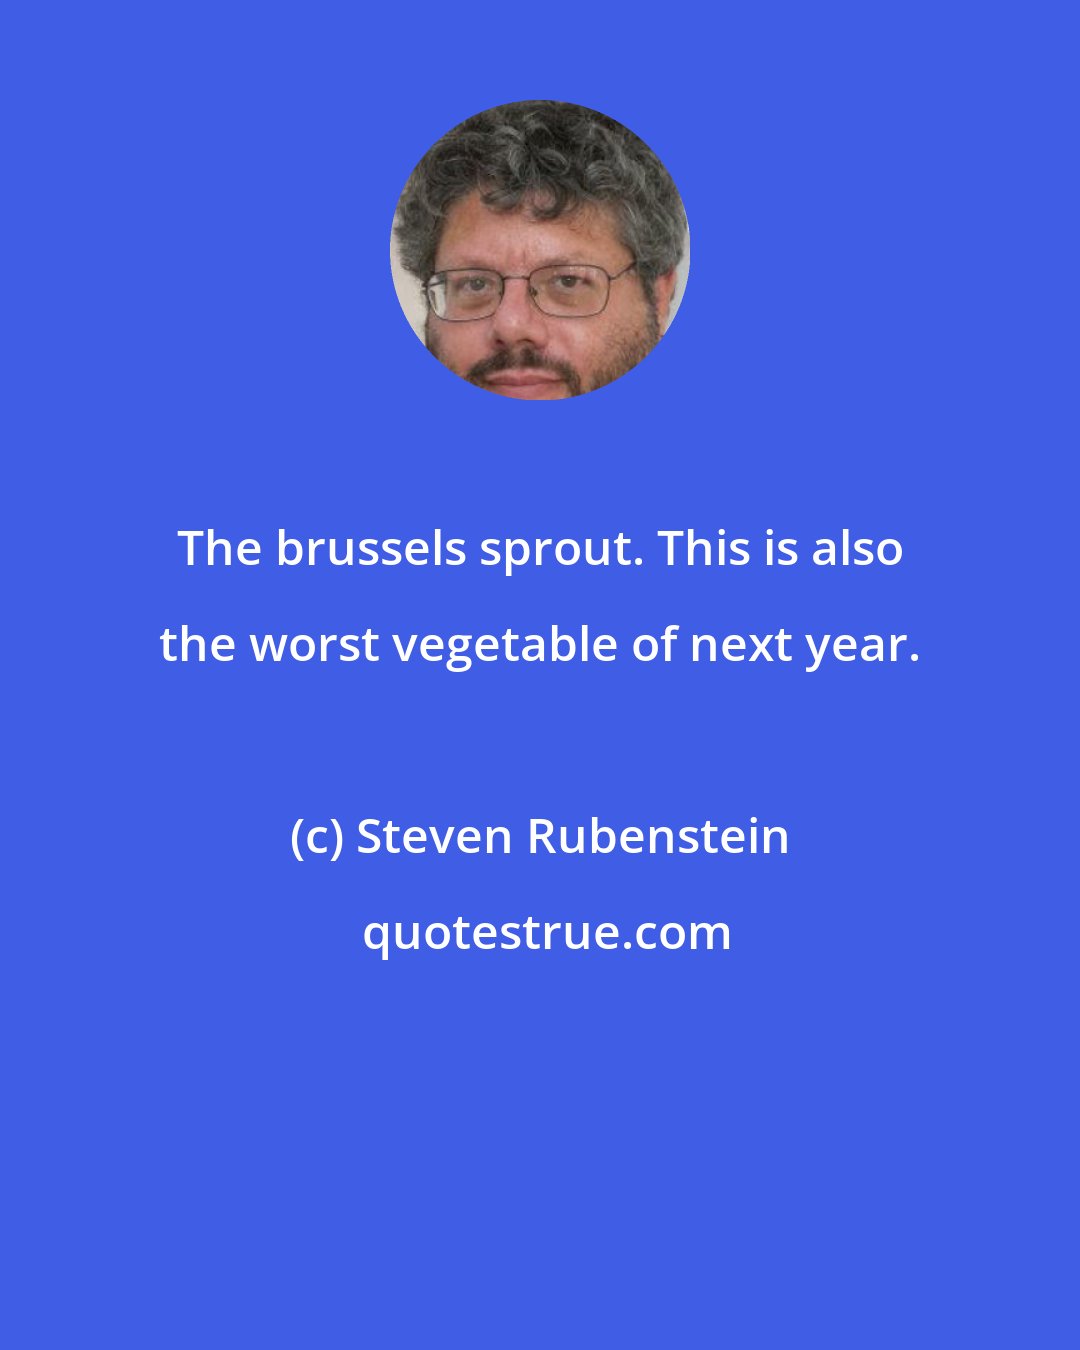 Steven Rubenstein: The brussels sprout. This is also the worst vegetable of next year.